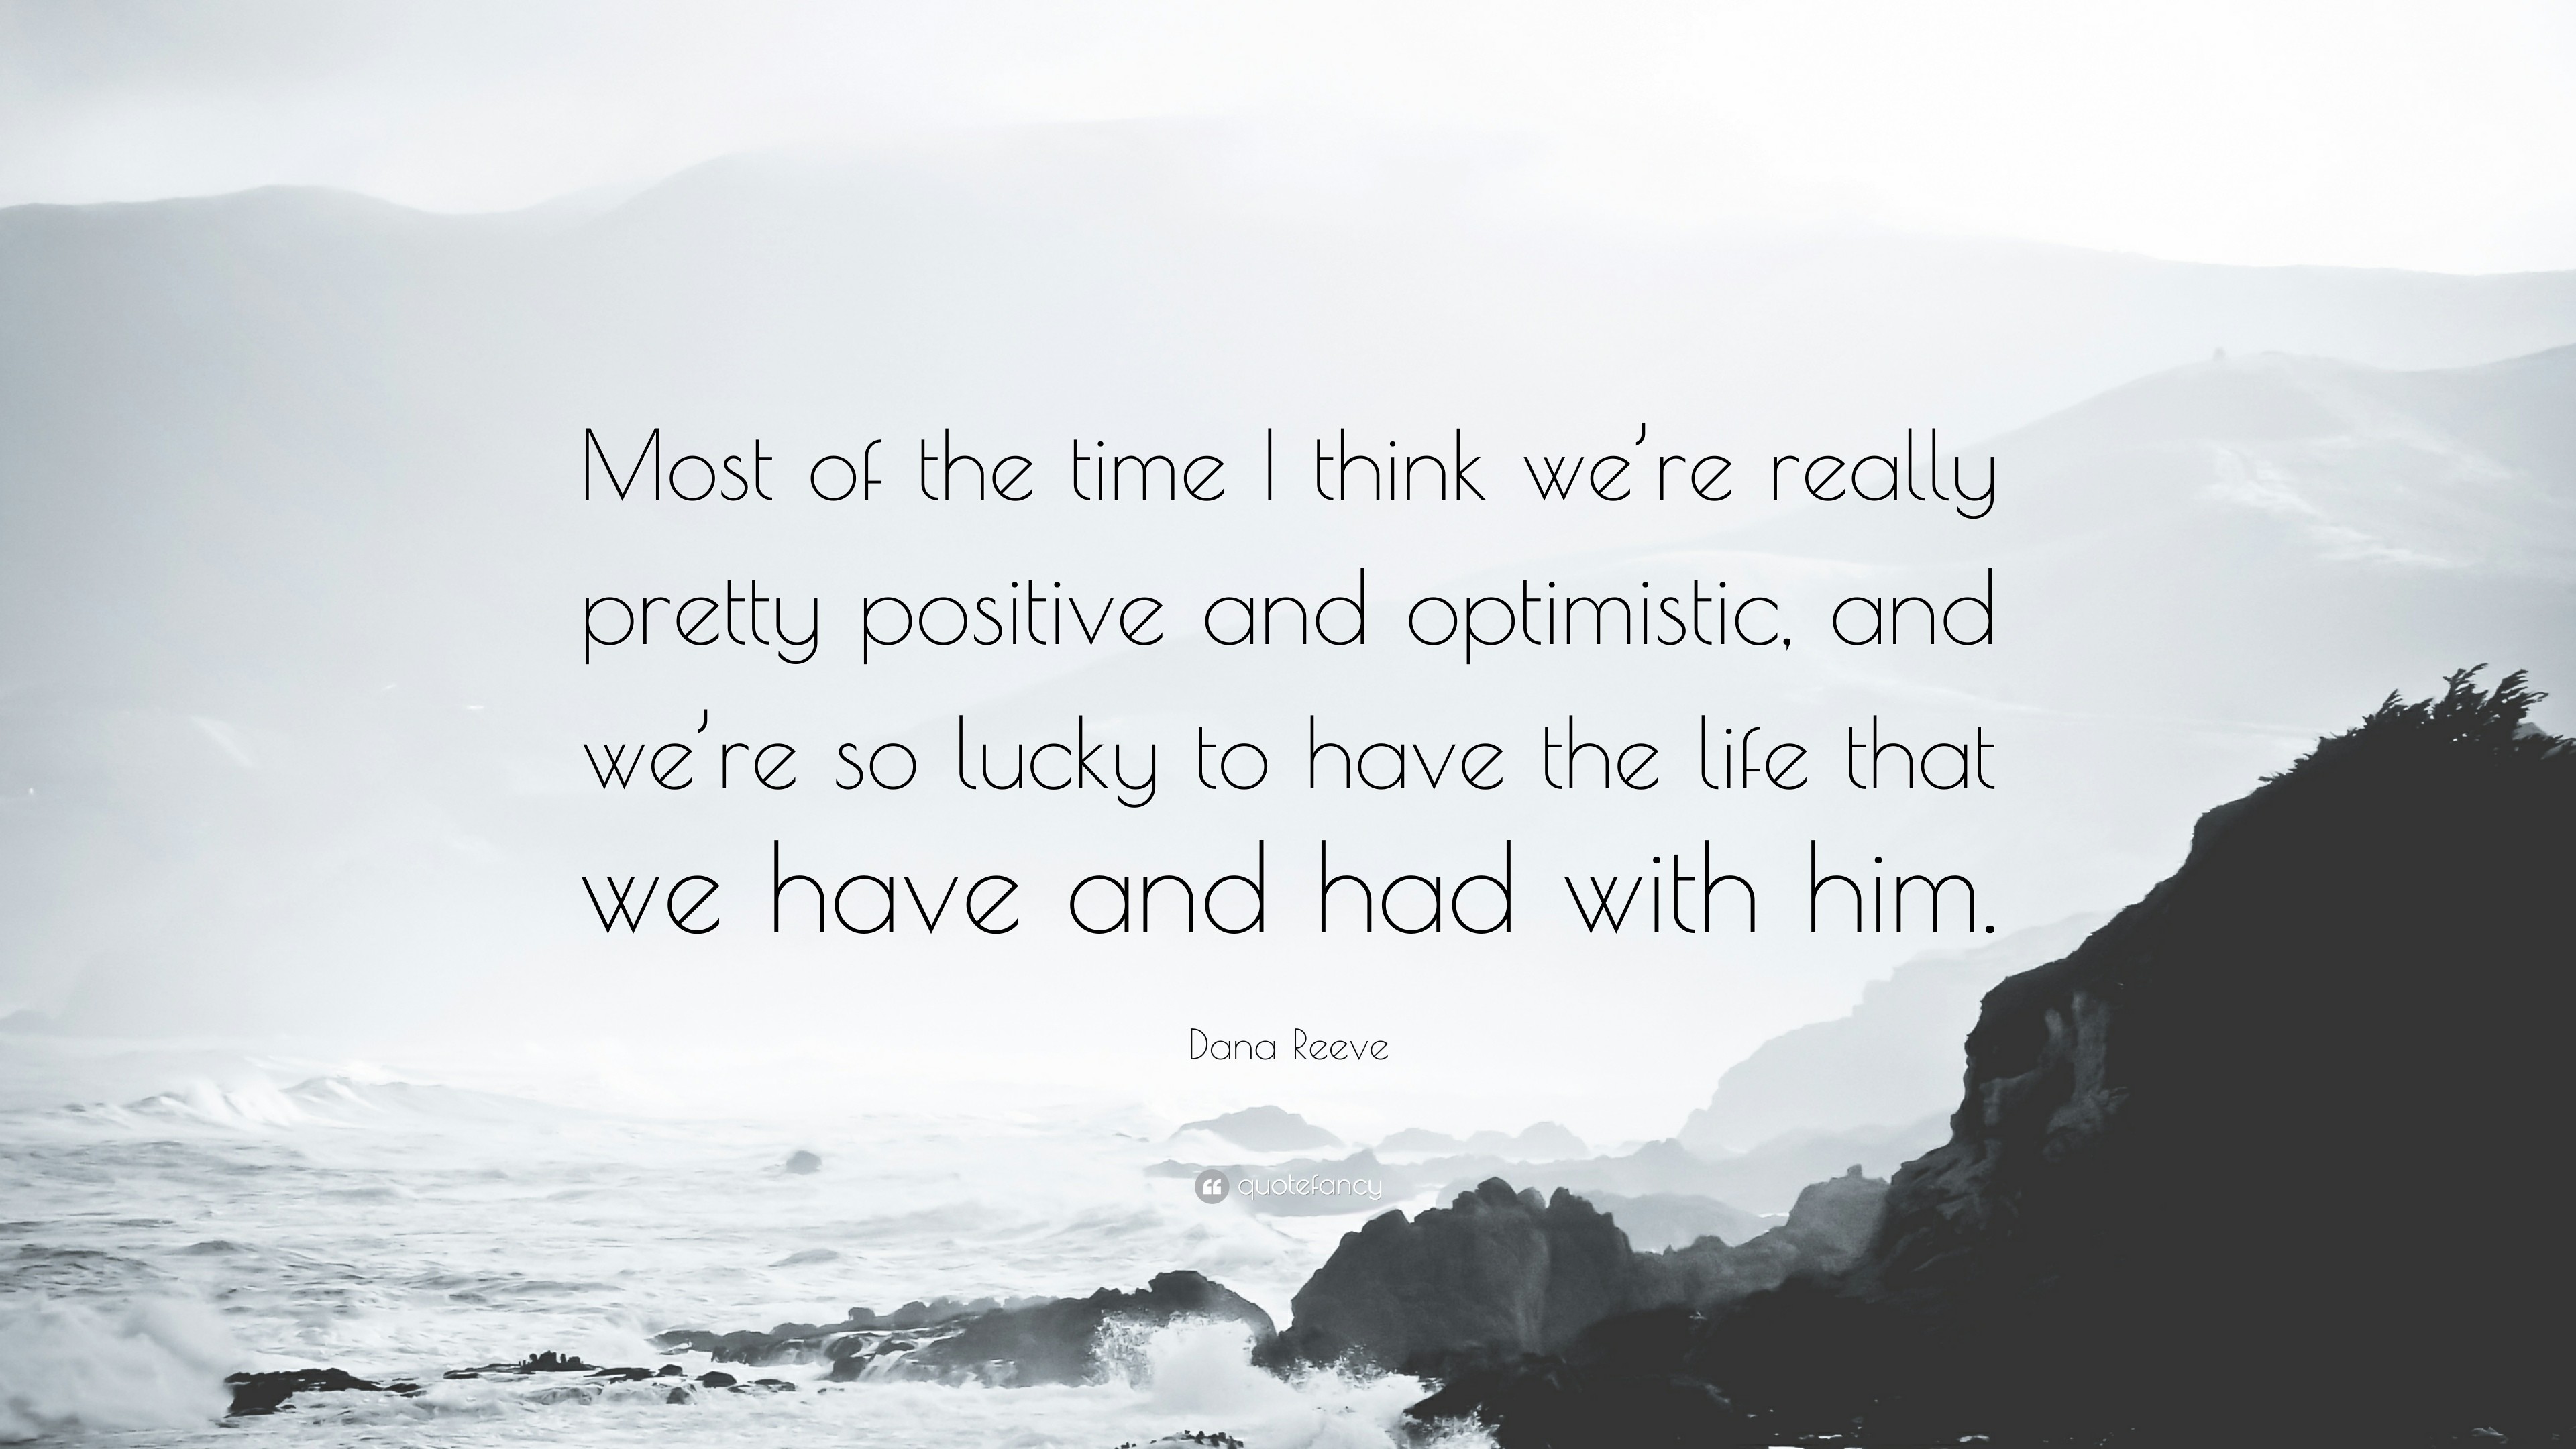 3840x2160 Dana Reeve Quote: “Most of the time I think we're really pretty